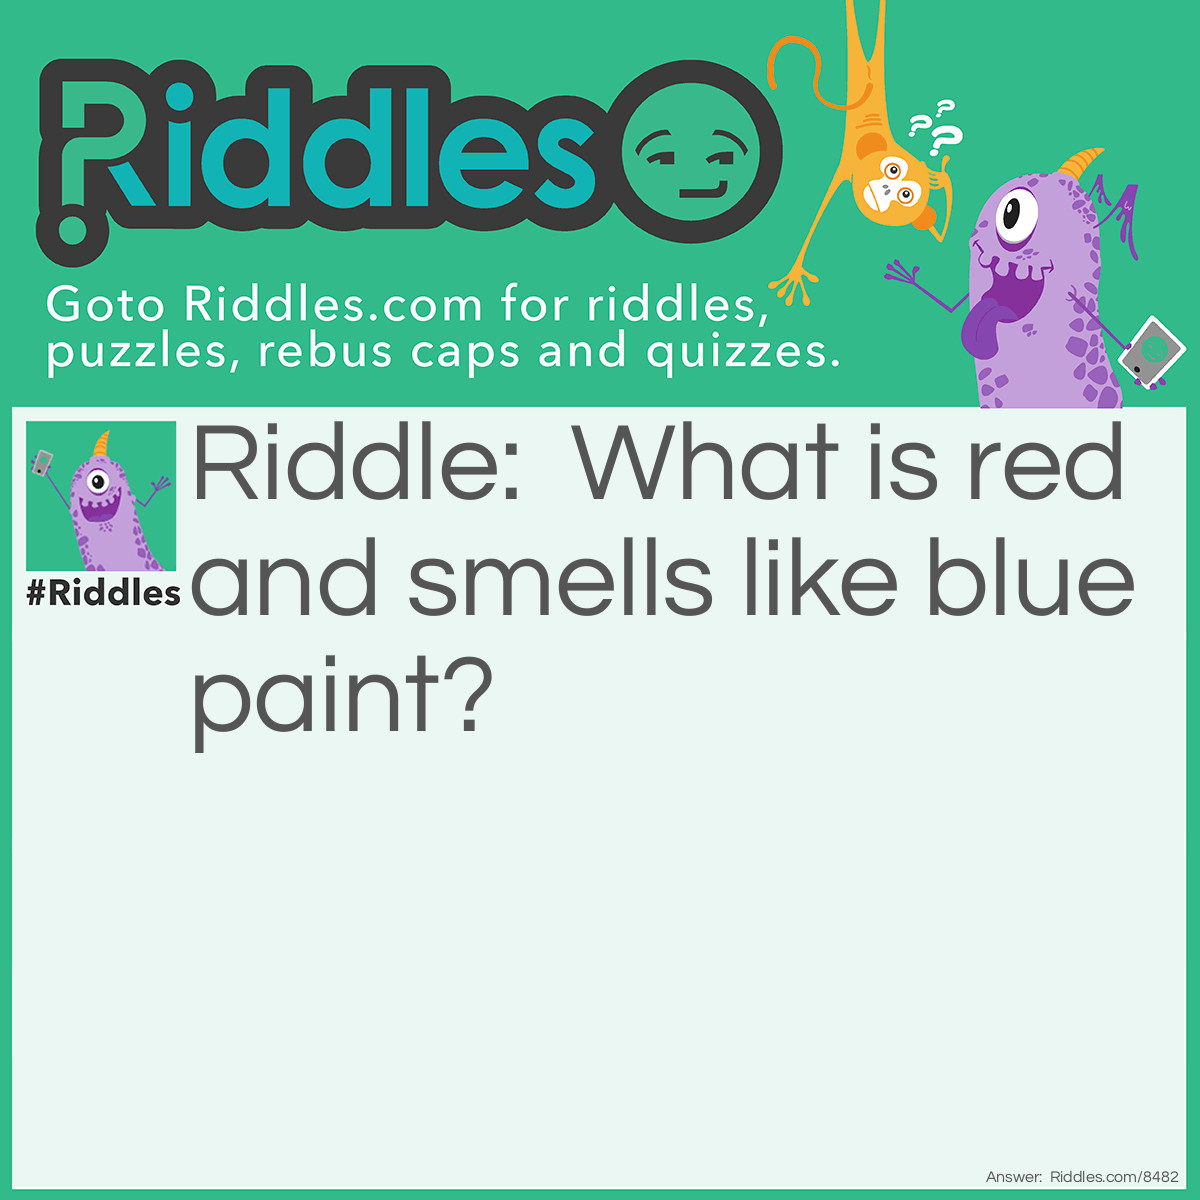 Riddle: What is red and smells like blue paint? Answer: Red paint.